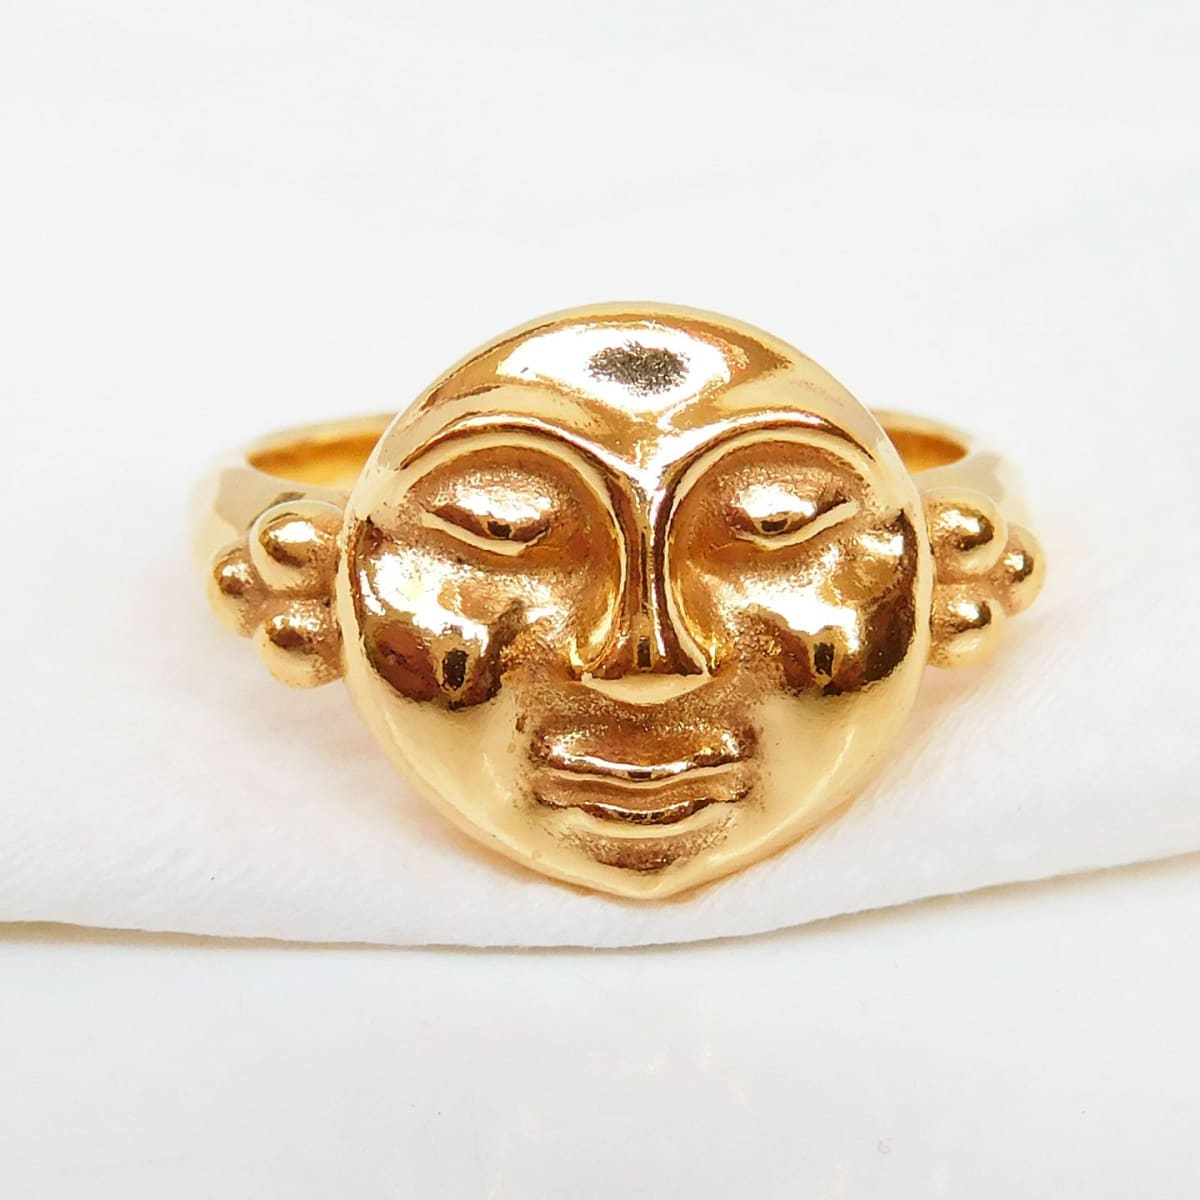 Gold-plated ring - Silver 925